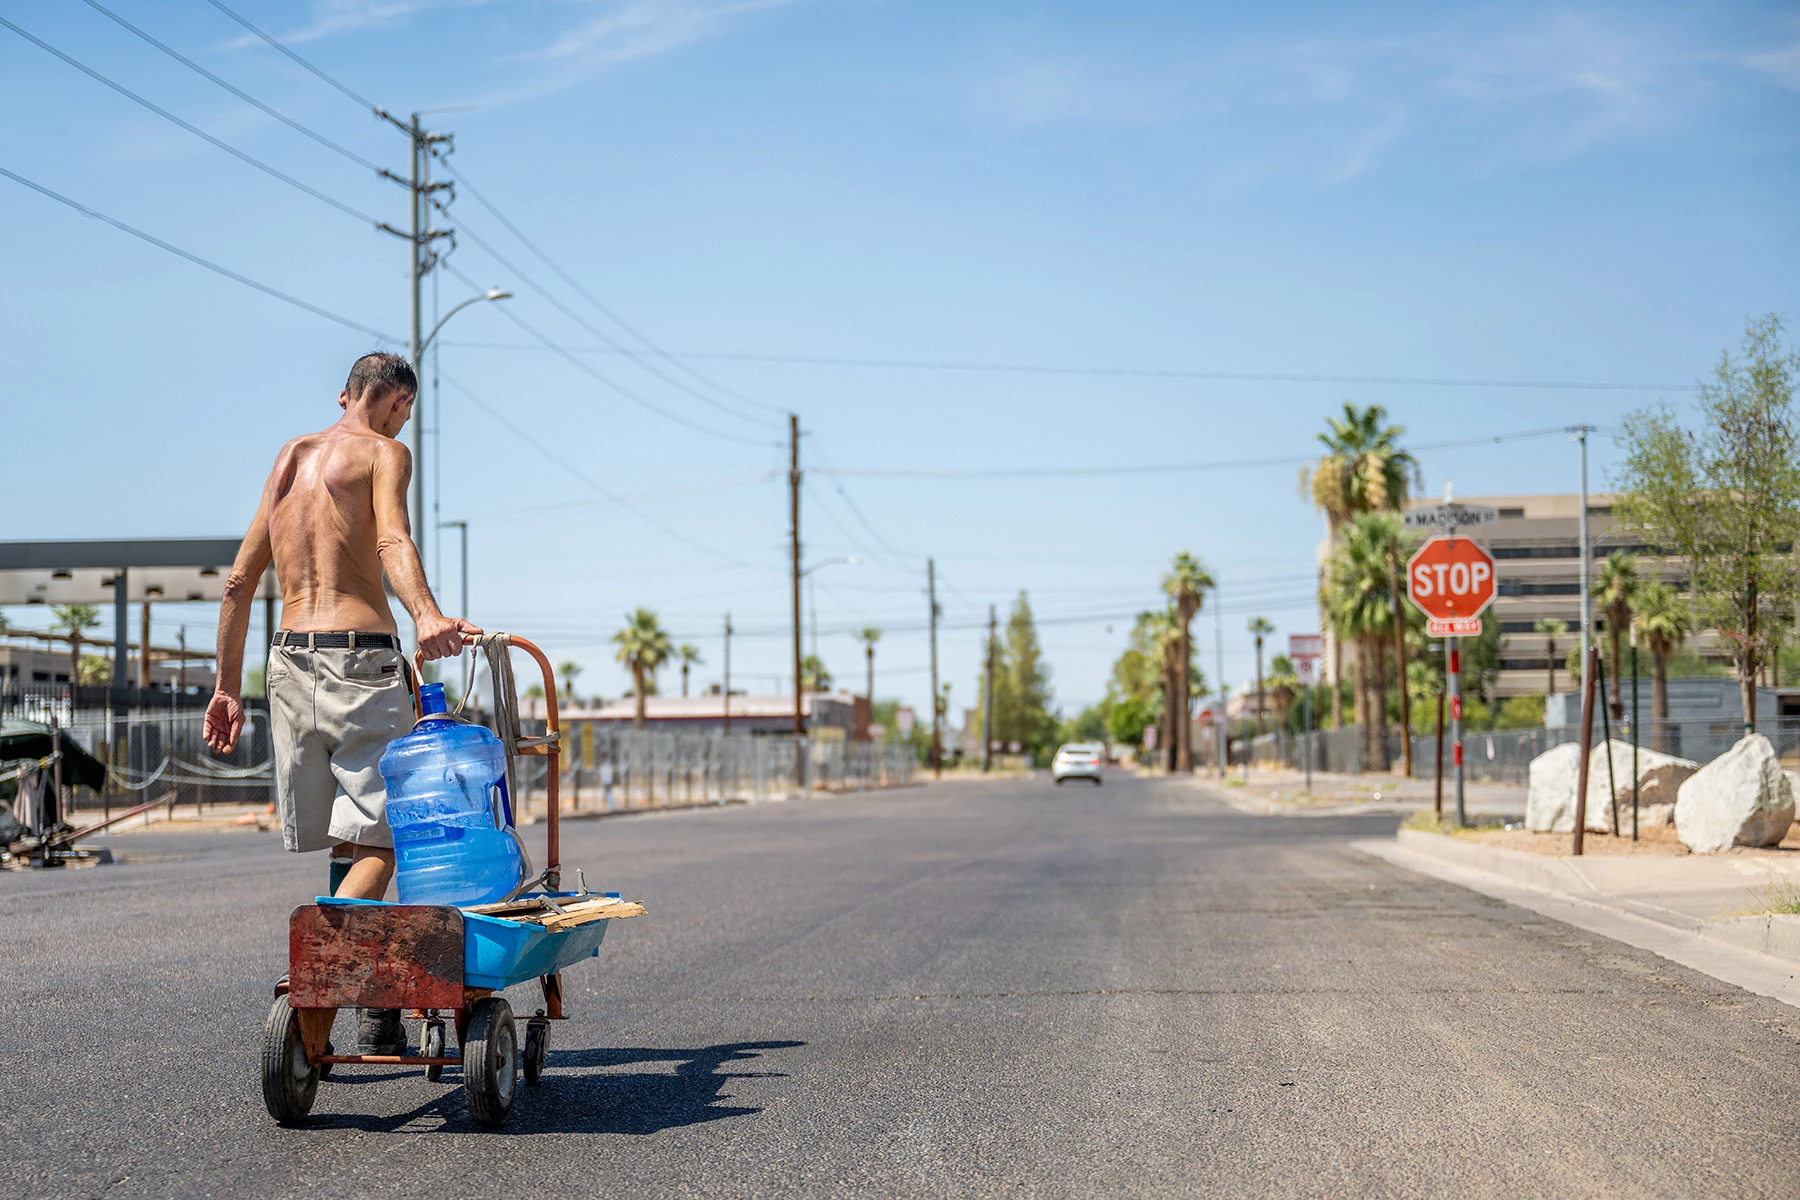 <p><br />
PHOENIX, ARIZONA - JULY 14: A person transports water jugs through a neighborhood on July 14, 2023 in Phoenix, Arizona. Today marks the Phoenix area&#39;s 15th consecutive day of temperatures exceeding 110 degrees. Record-breaking temperatures continue soaring as prolonged heatwaves sweep across the Southwest. (Photo by&nbsp;</p>